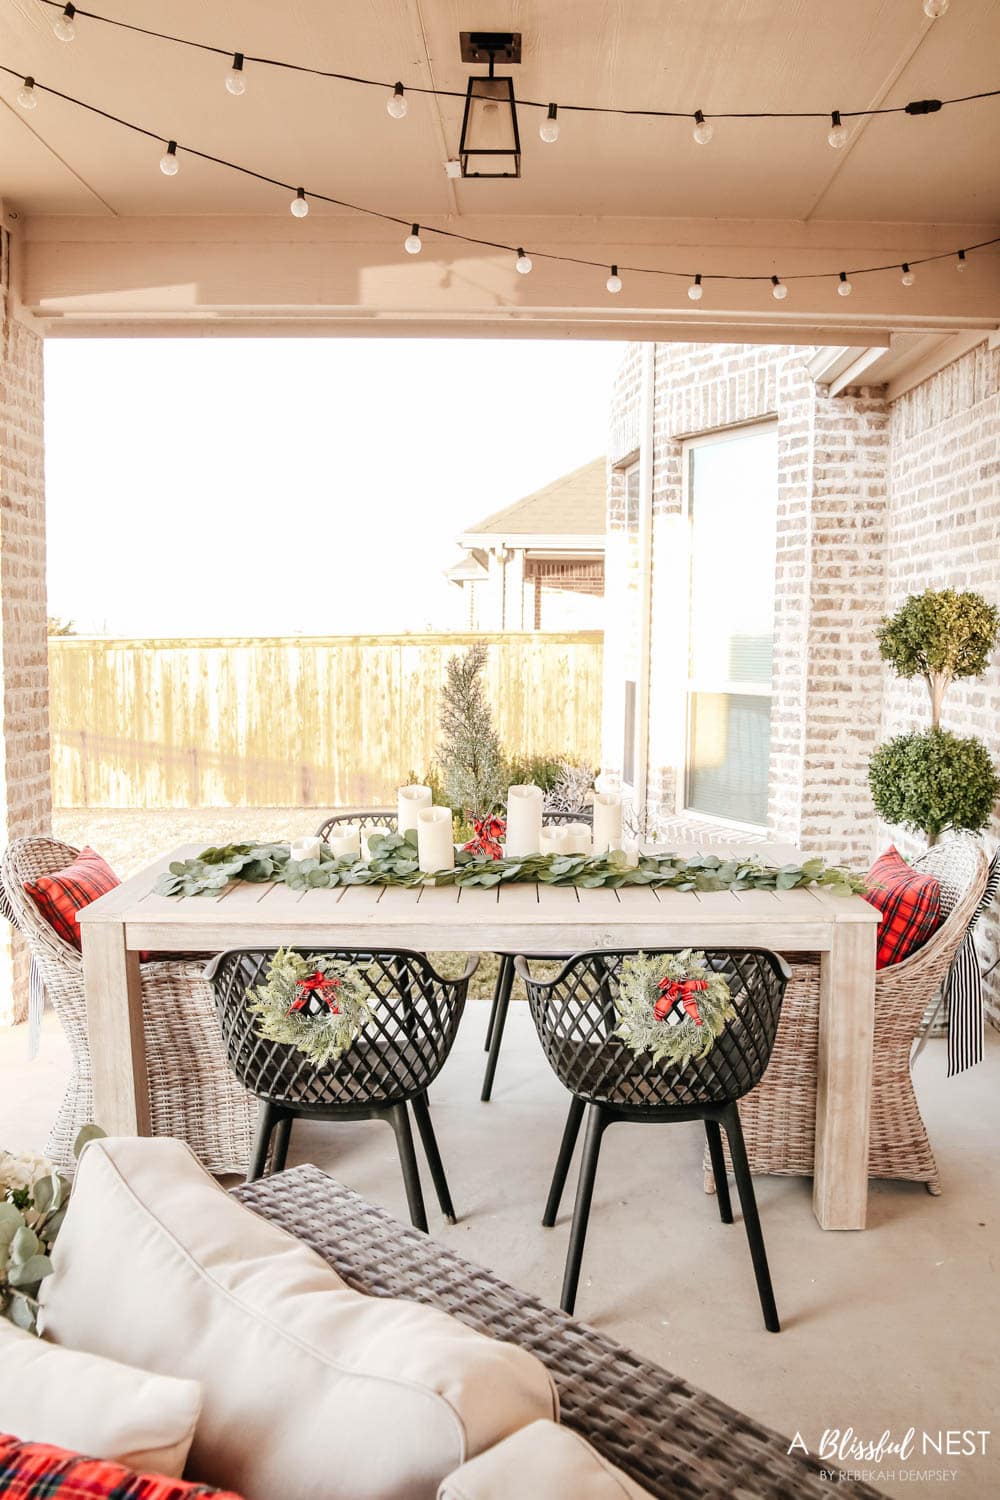 Stylish + Affordable Outdoor Decor Finds For Summer - A Blissful Nest